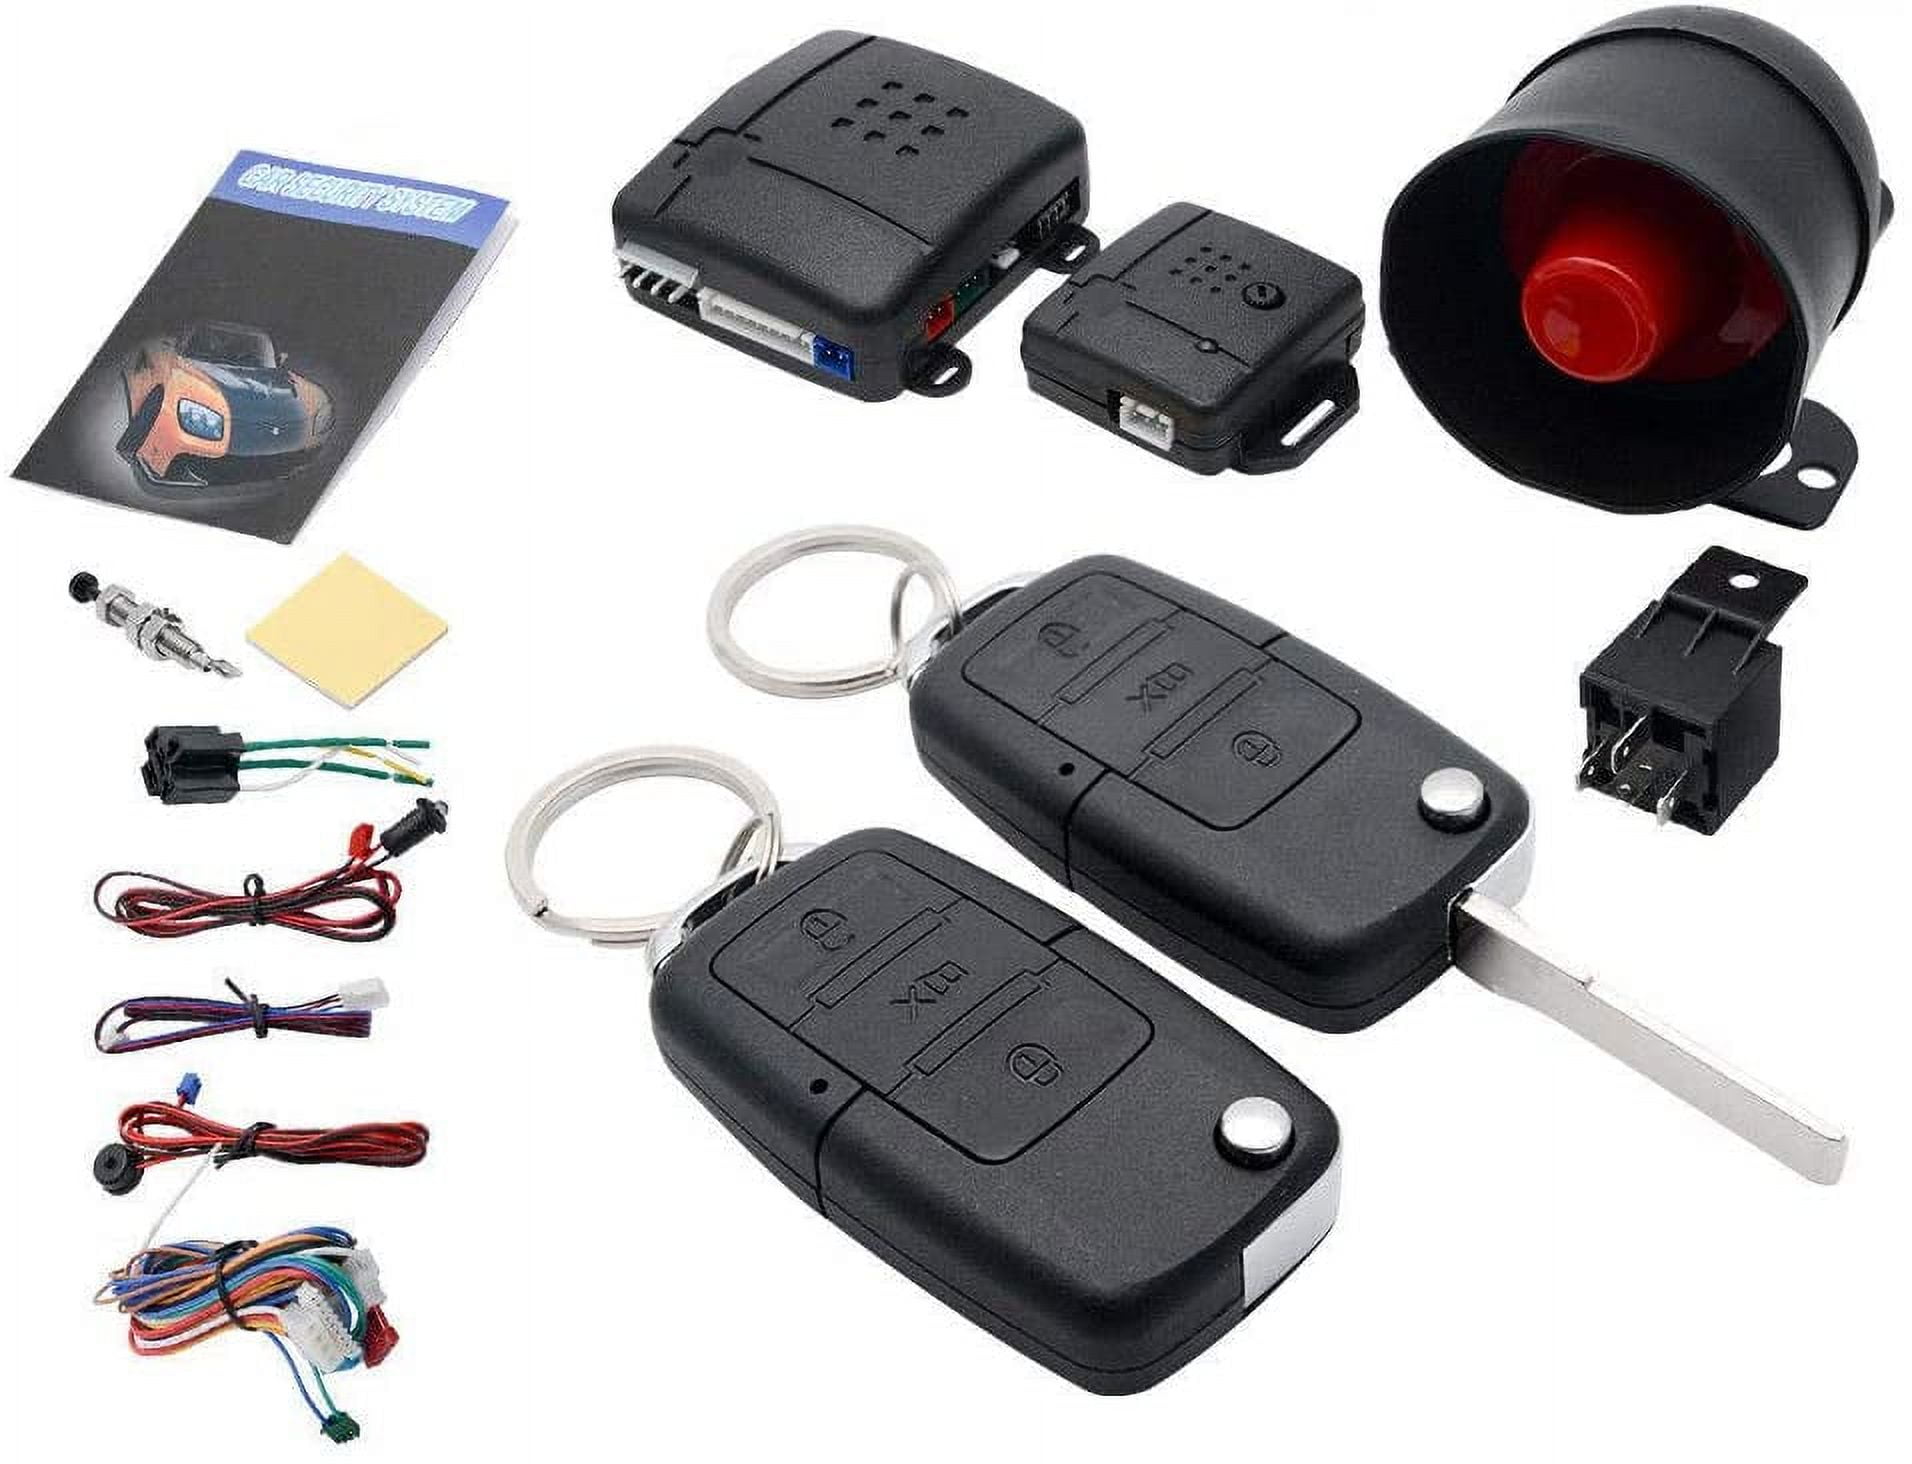 TOTMOX Car Central Lock Universal Auto Remote Central Kit Vehicle Door Lock  with Shock Sensor + Contorl Box + 2 Replacement Remote Contorl for Car